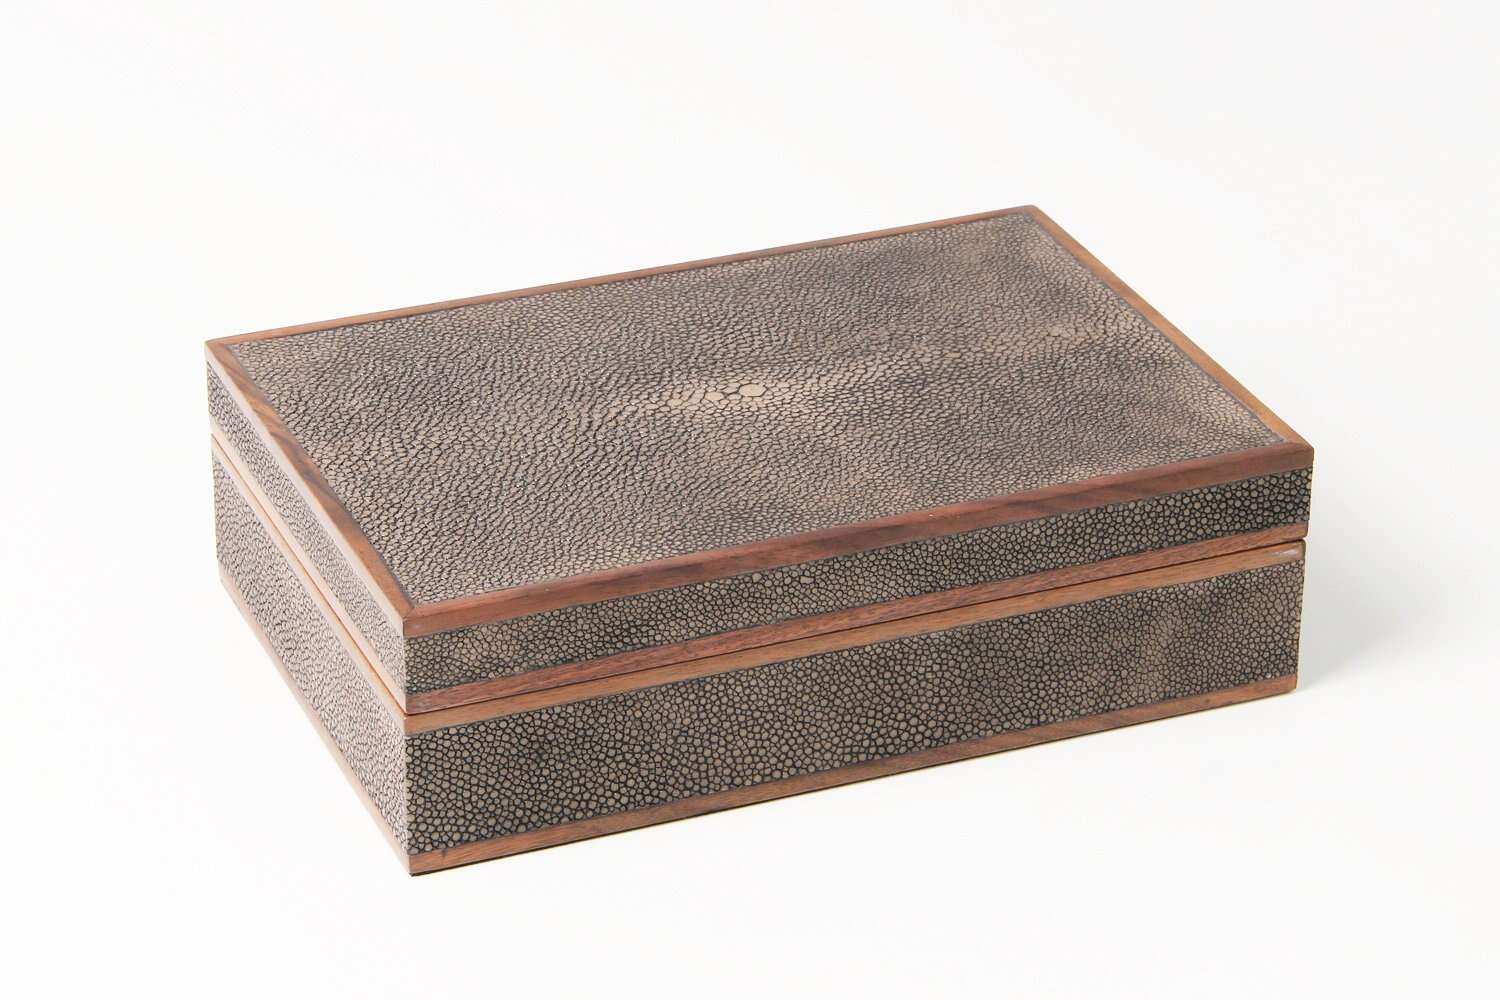 Jewelry box in gorgeous brown shagreen